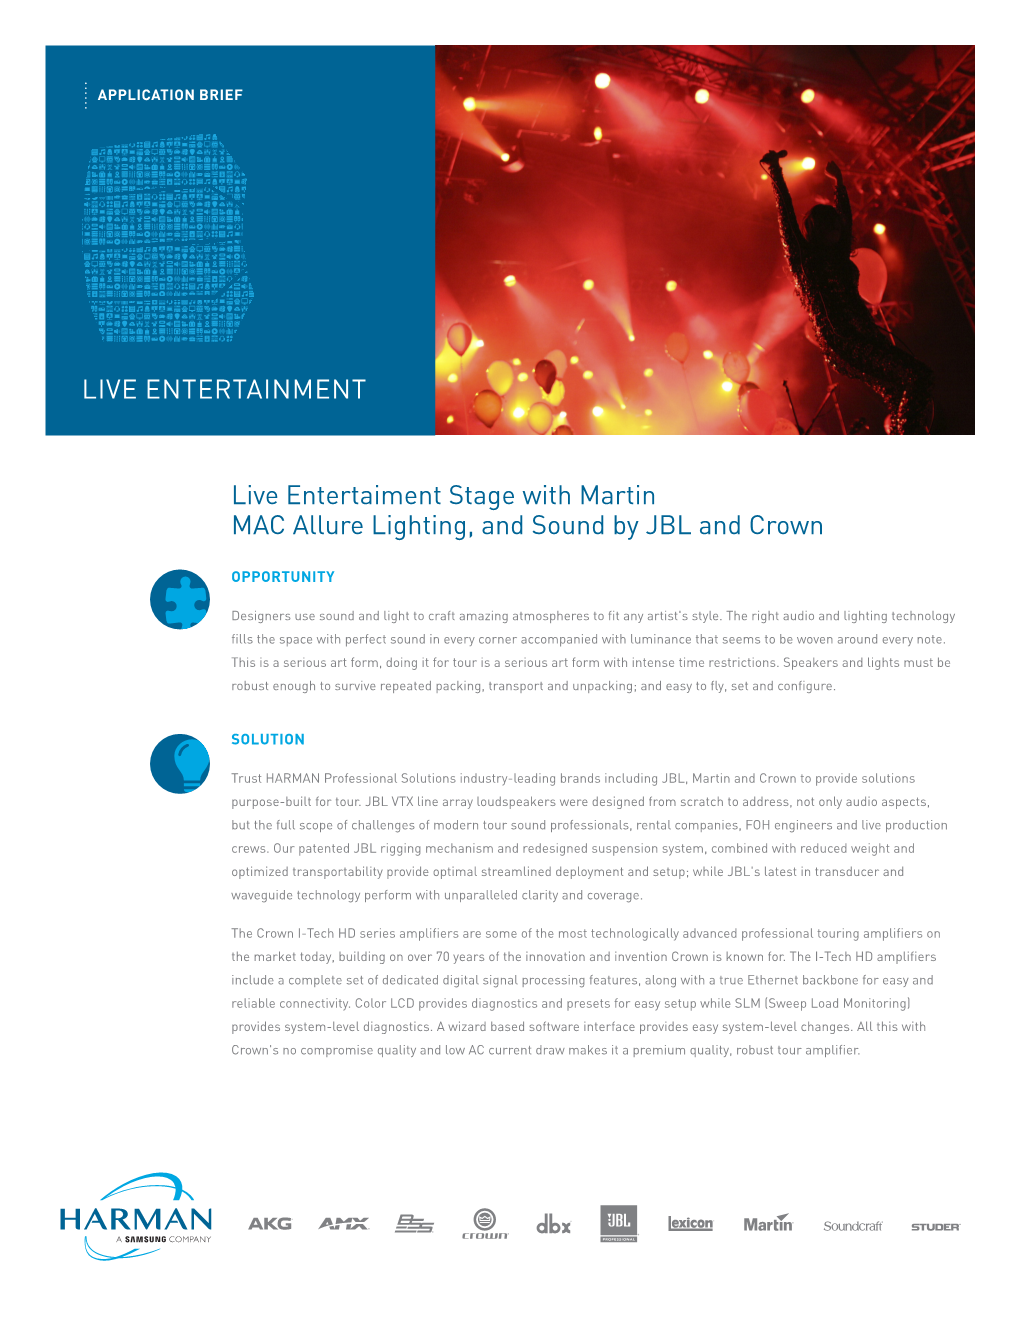 LIVE ENTERTAINMENT Live Entertaiment Stage with Martin